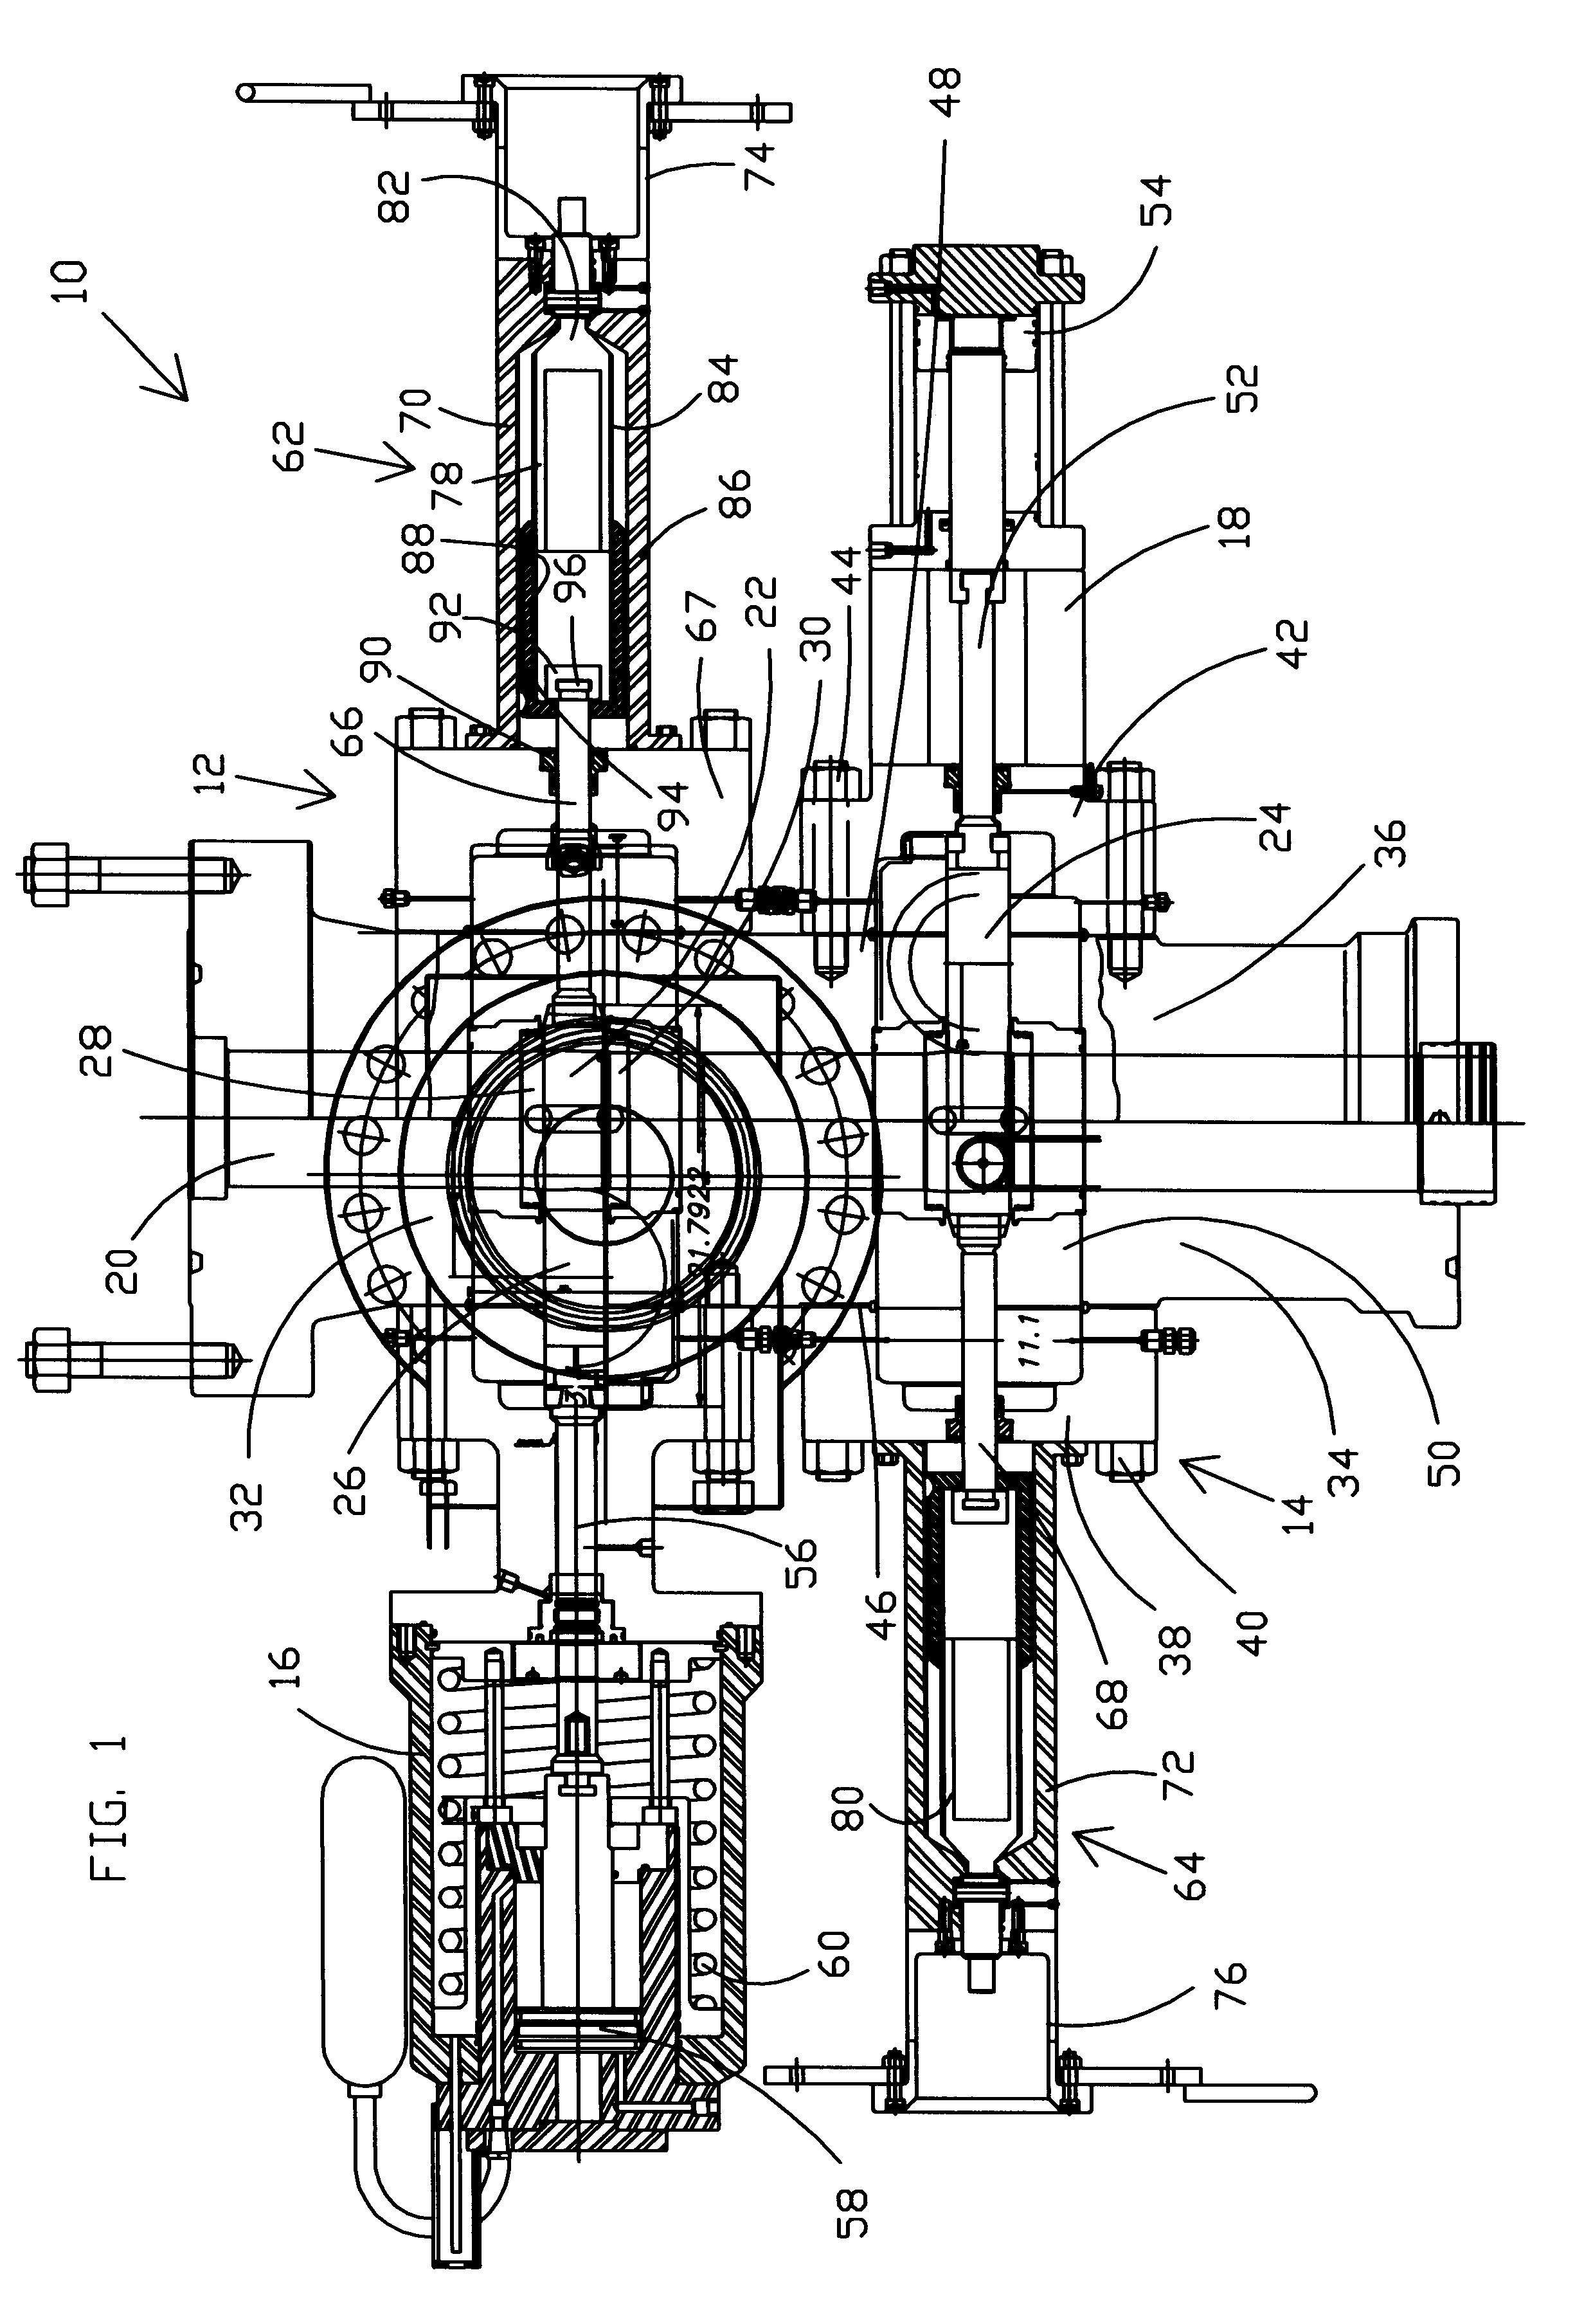 Method and apparatus for replacing BOP with gate valve